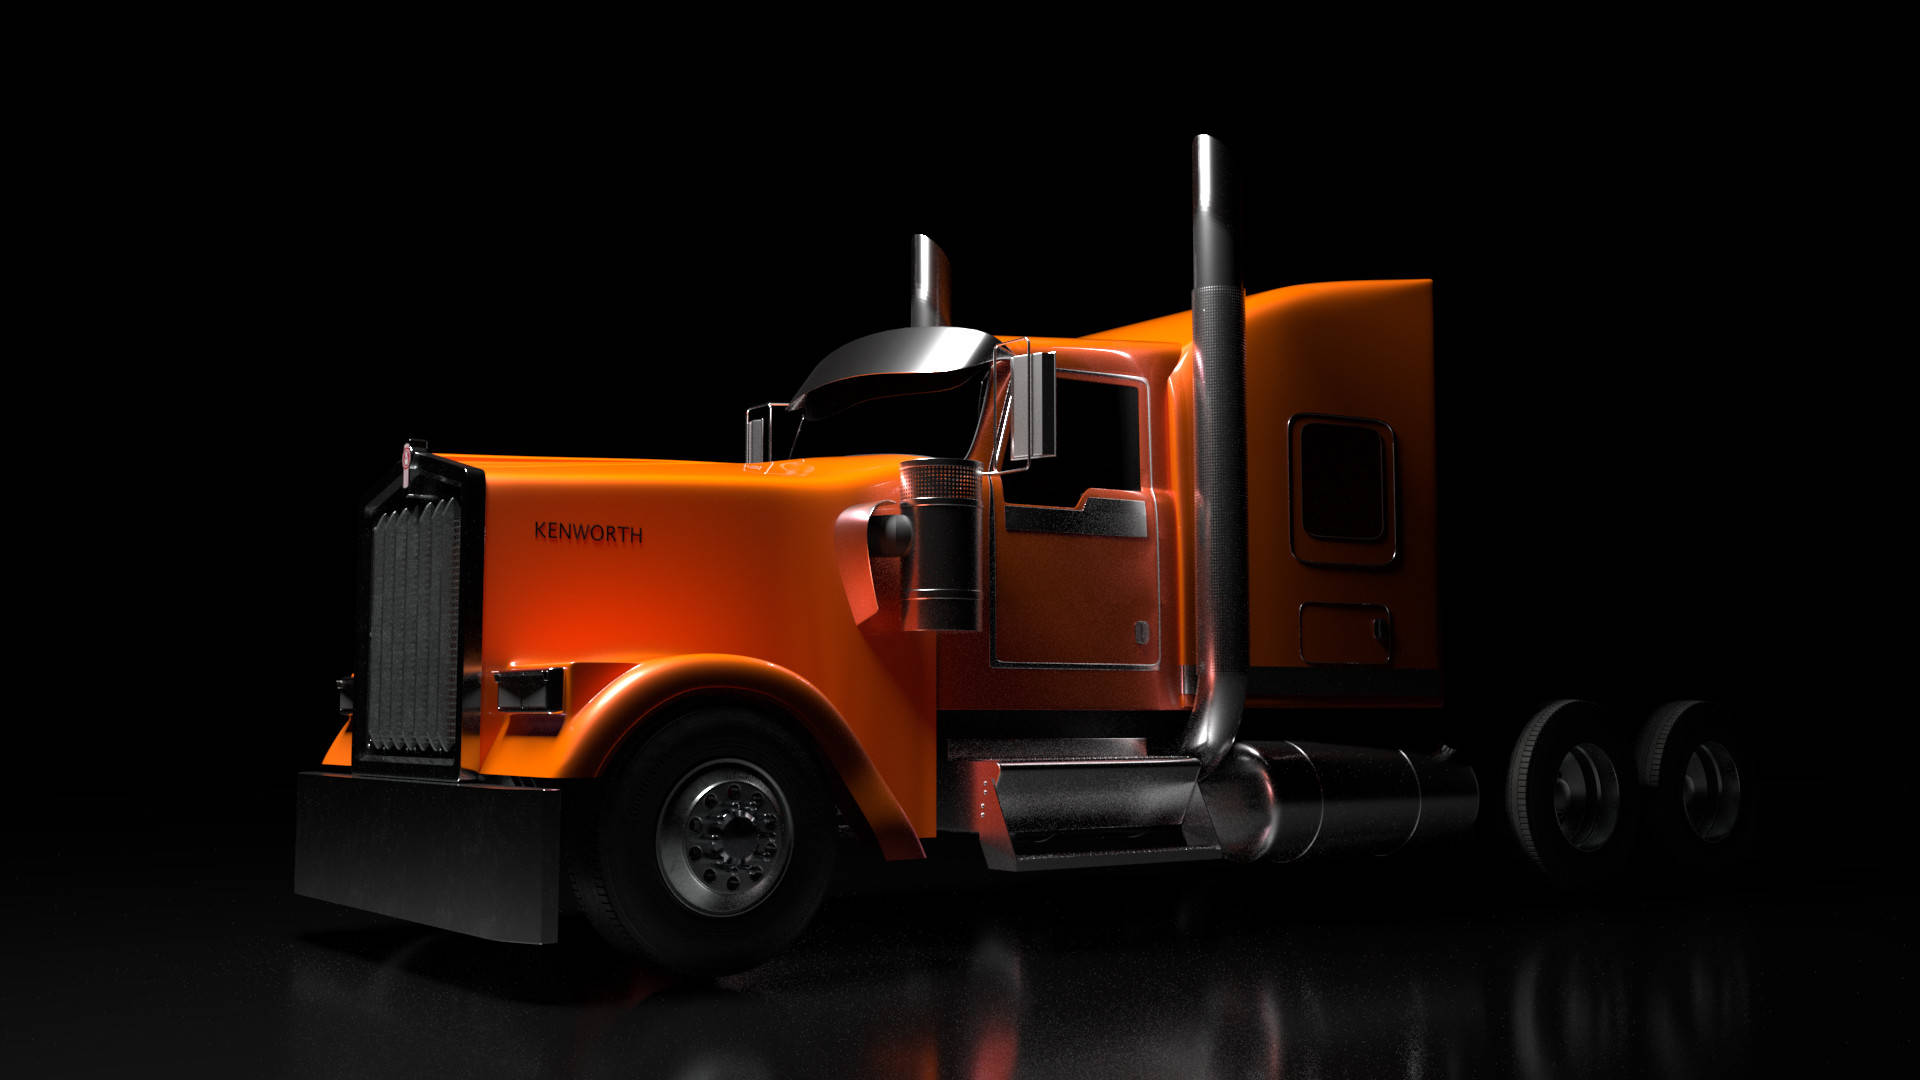 Caption: Power and Excellence - Orange Kenworth Truck Wallpaper